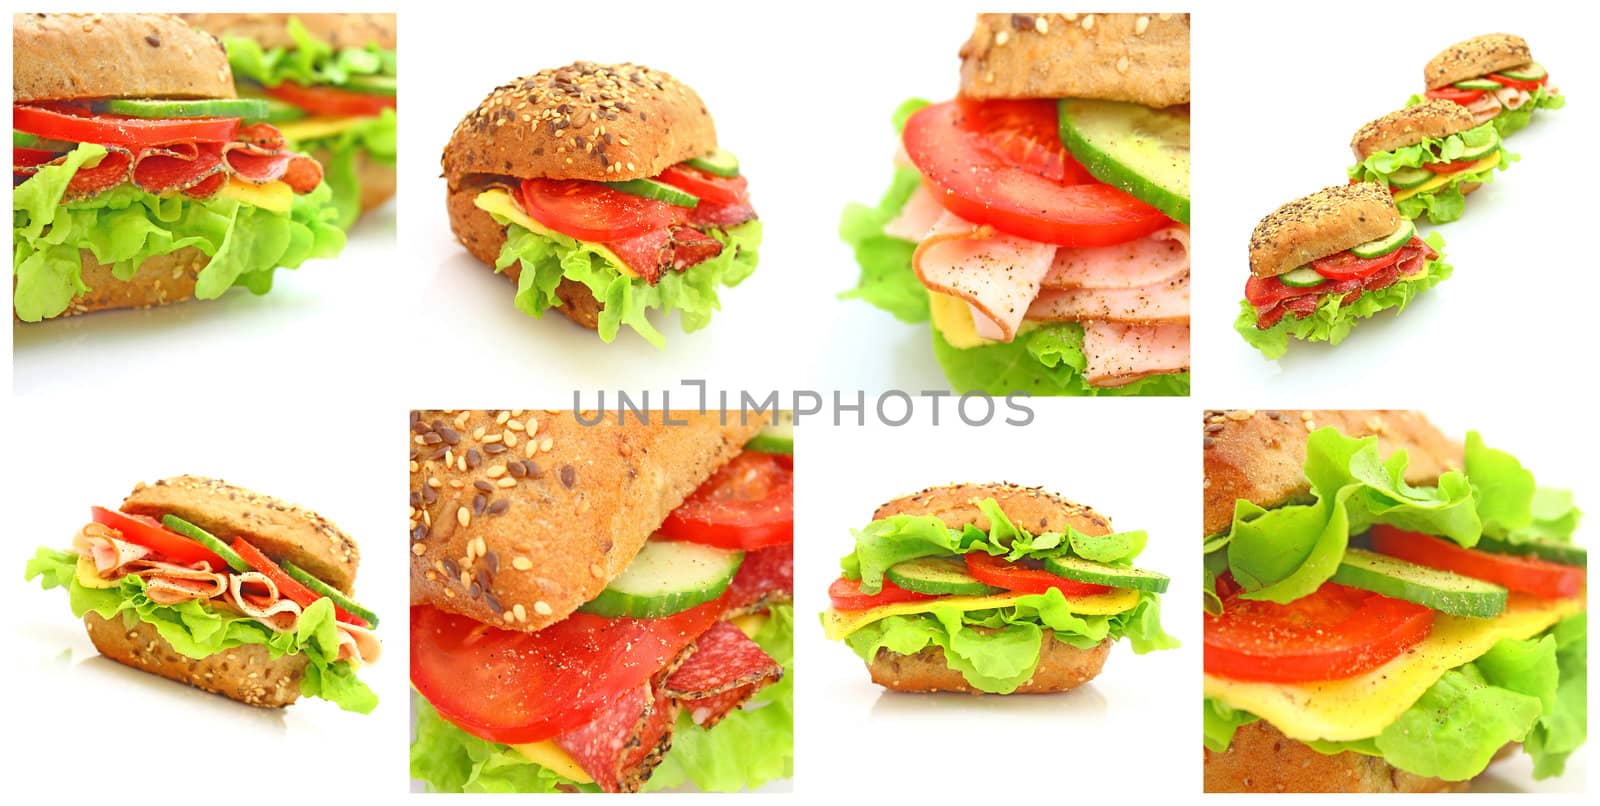 Collage of many different fresh sandwichs with cheese or ham